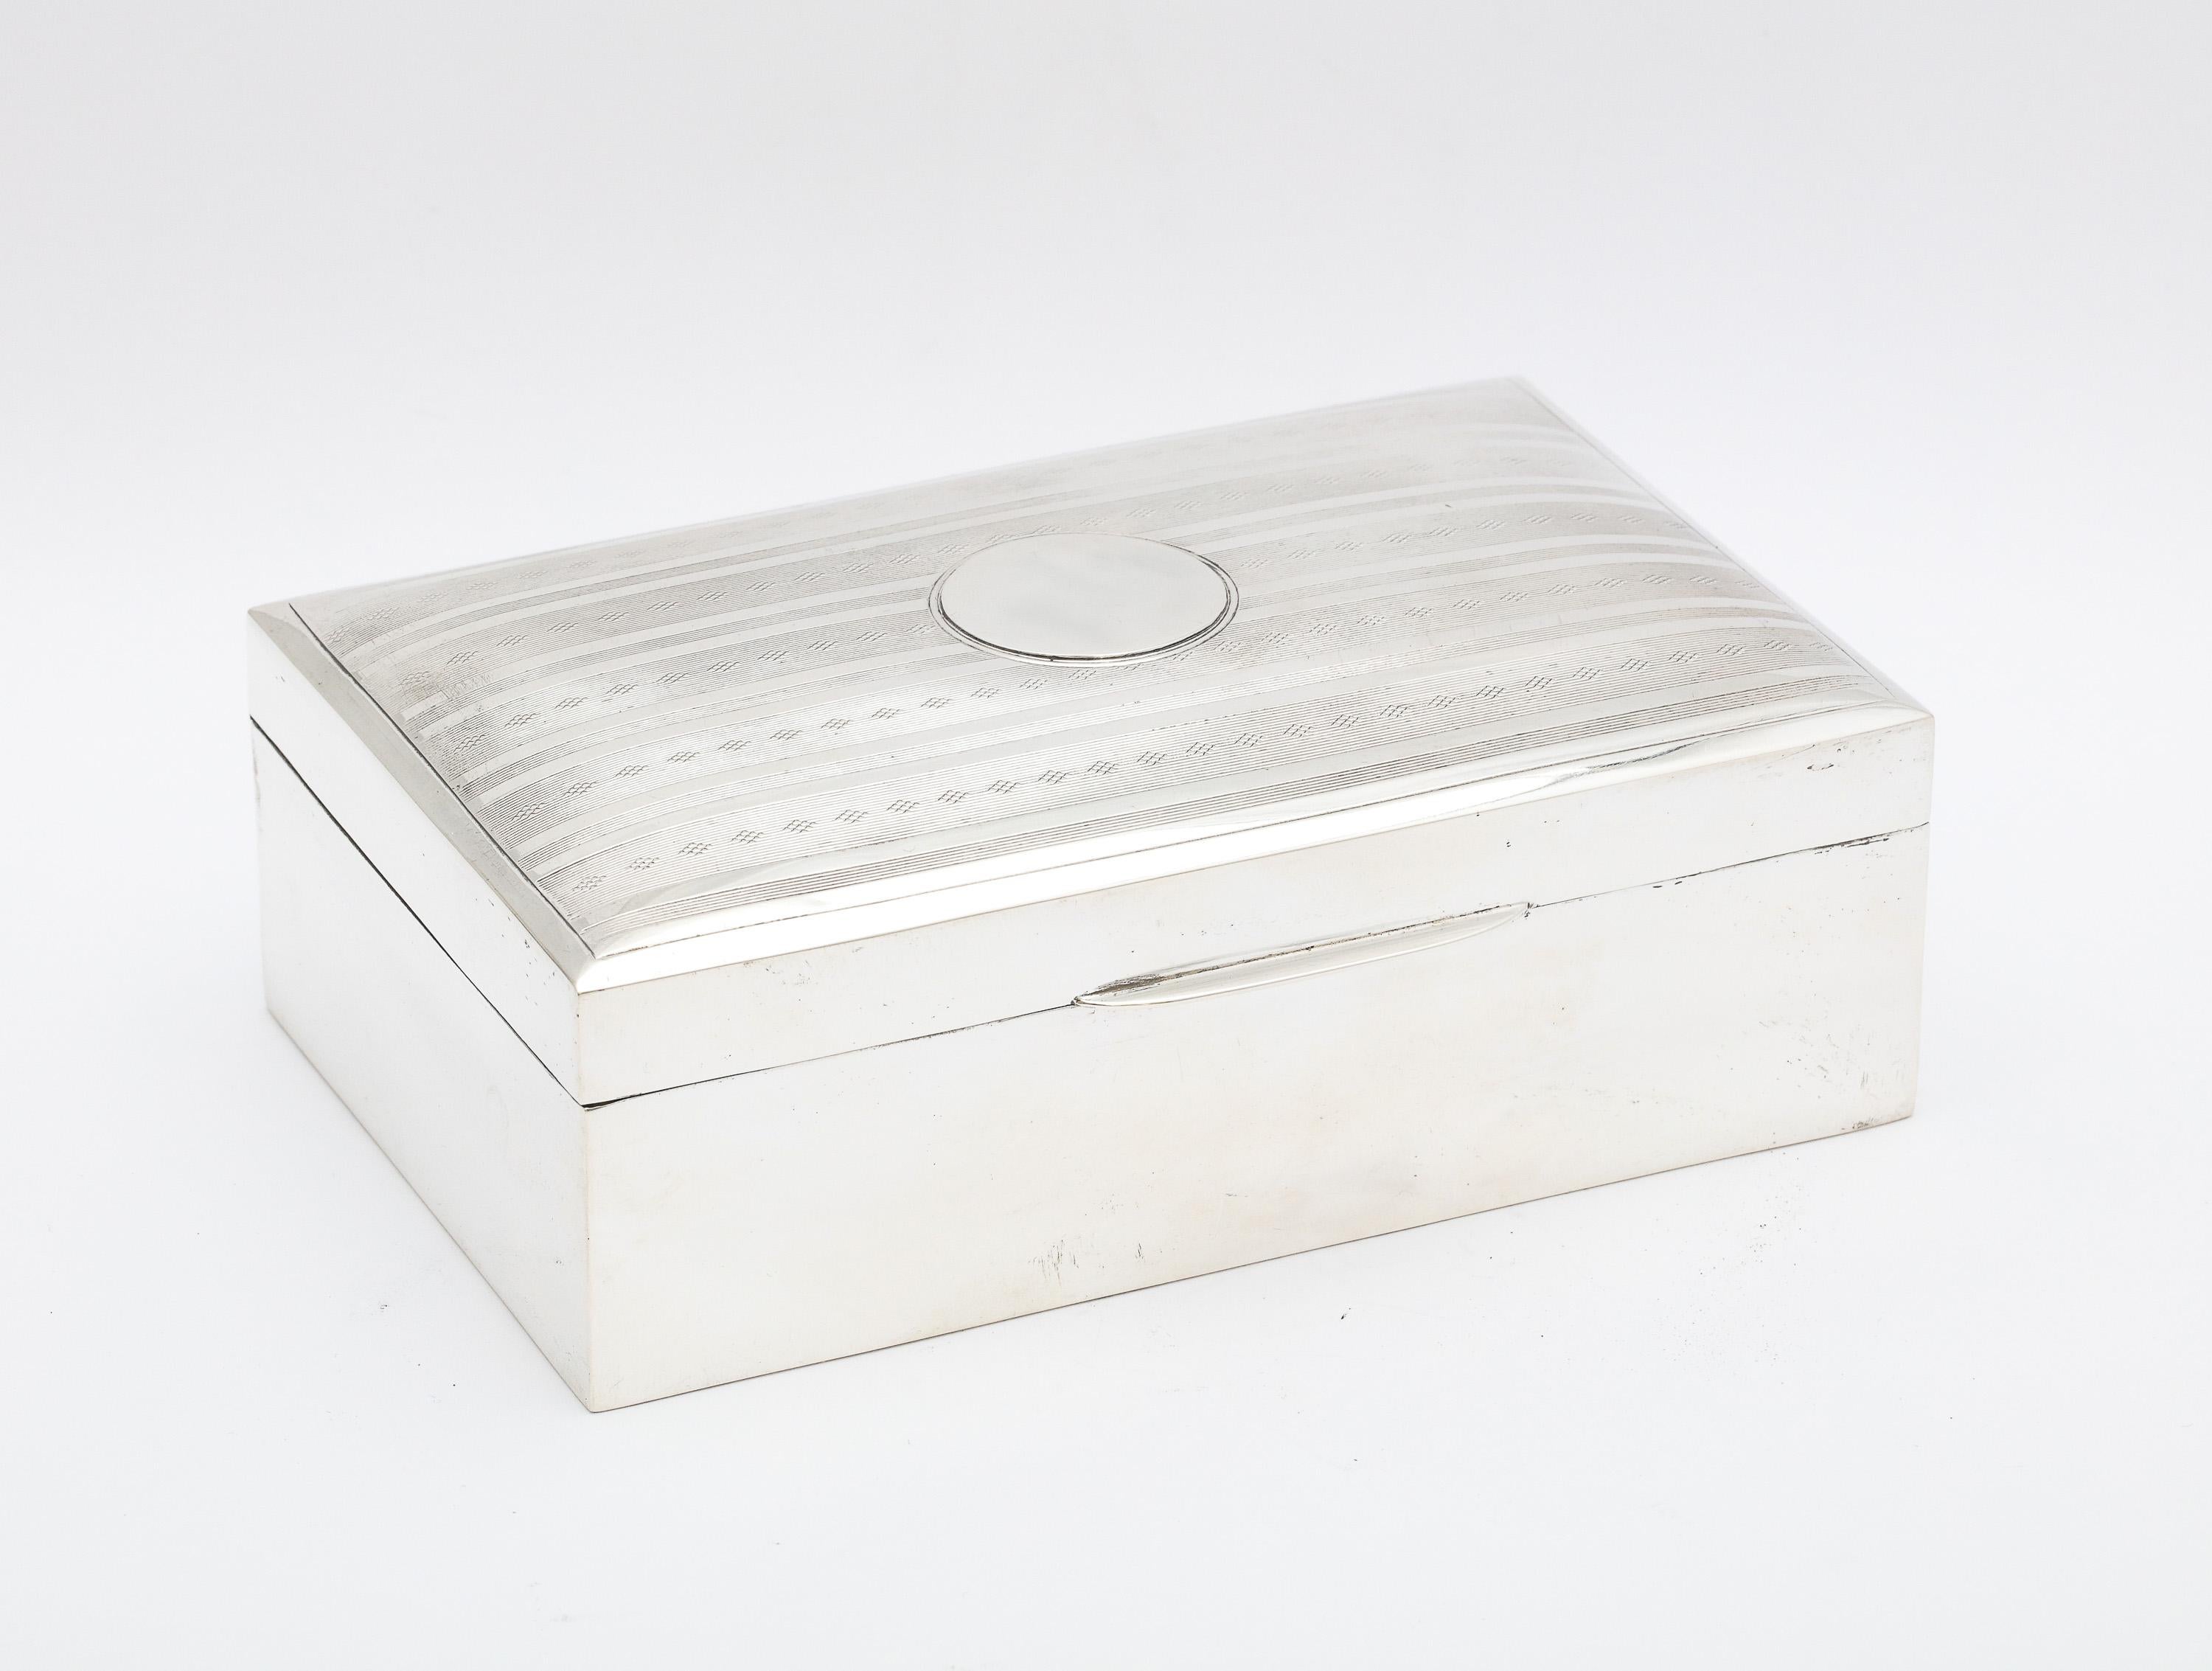 Edwardian, sterling silver table box with hinged lid and wood lining, Chester, England, 1913, Colen Hewer Cheshire - maker. Measures 5 1/2 inches wide x over 3 1/2 inches deep x 2 1/2 inches high at highest point of slightly domed lid. Vacant